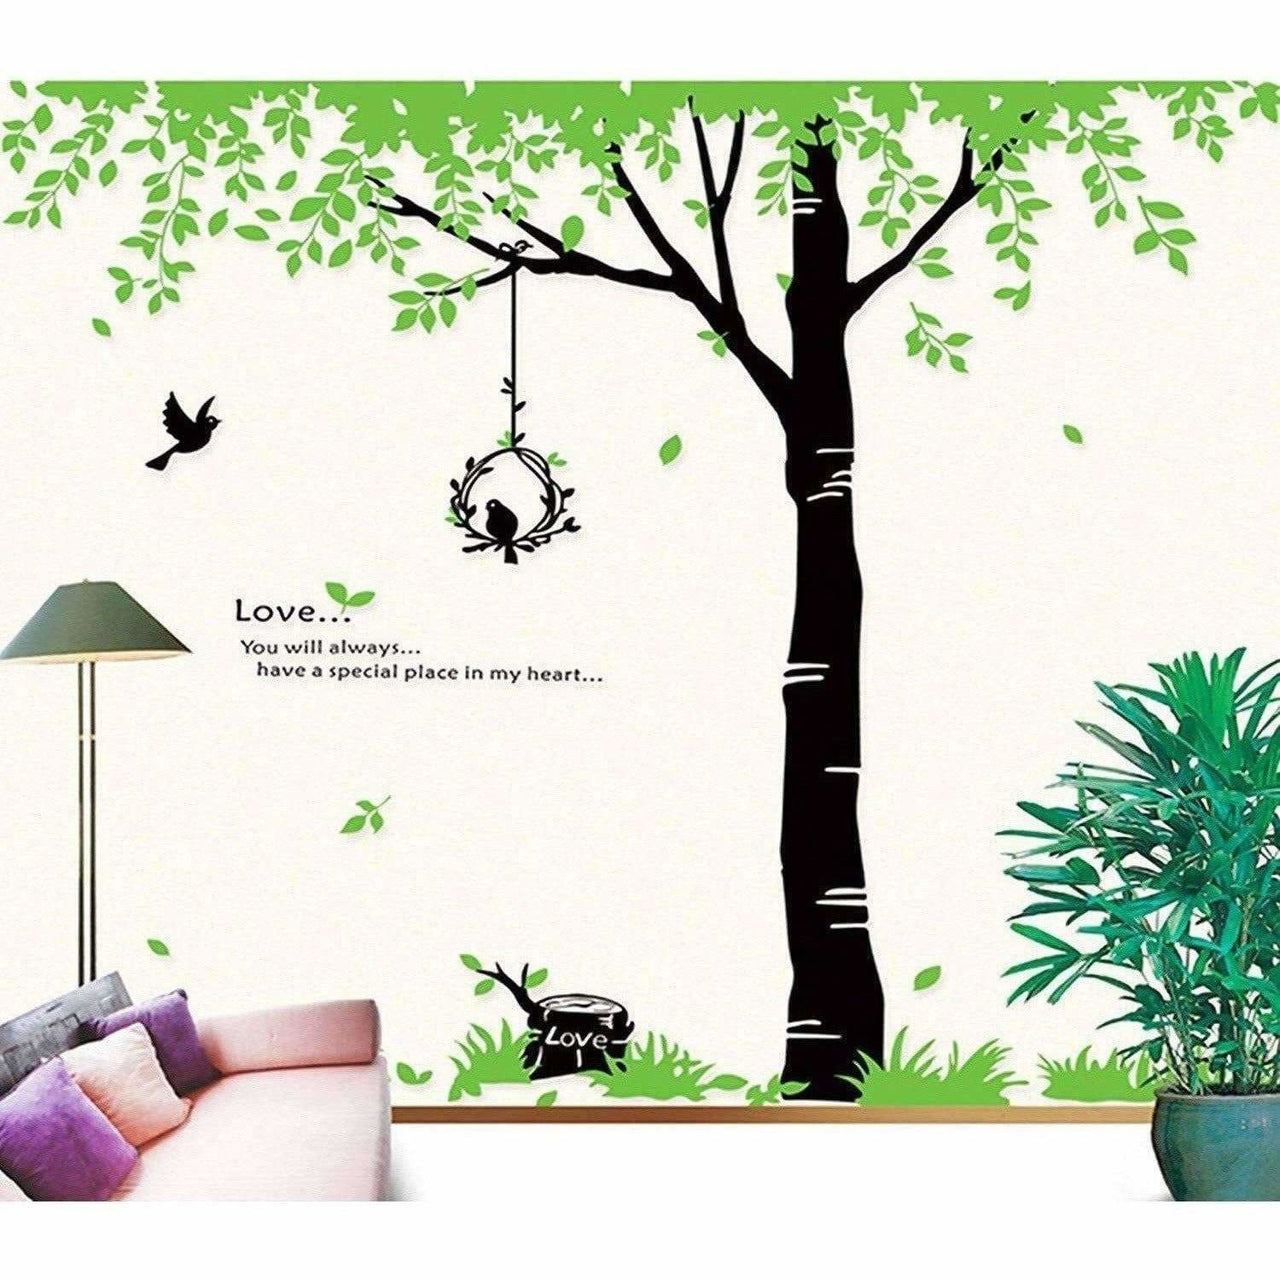 StylishWalls PVC Vinyl Self-Adhesive Calm Green Trees Nature Wall Stickers for Bedroom (Large, 220 x 200 cm) - Distacart